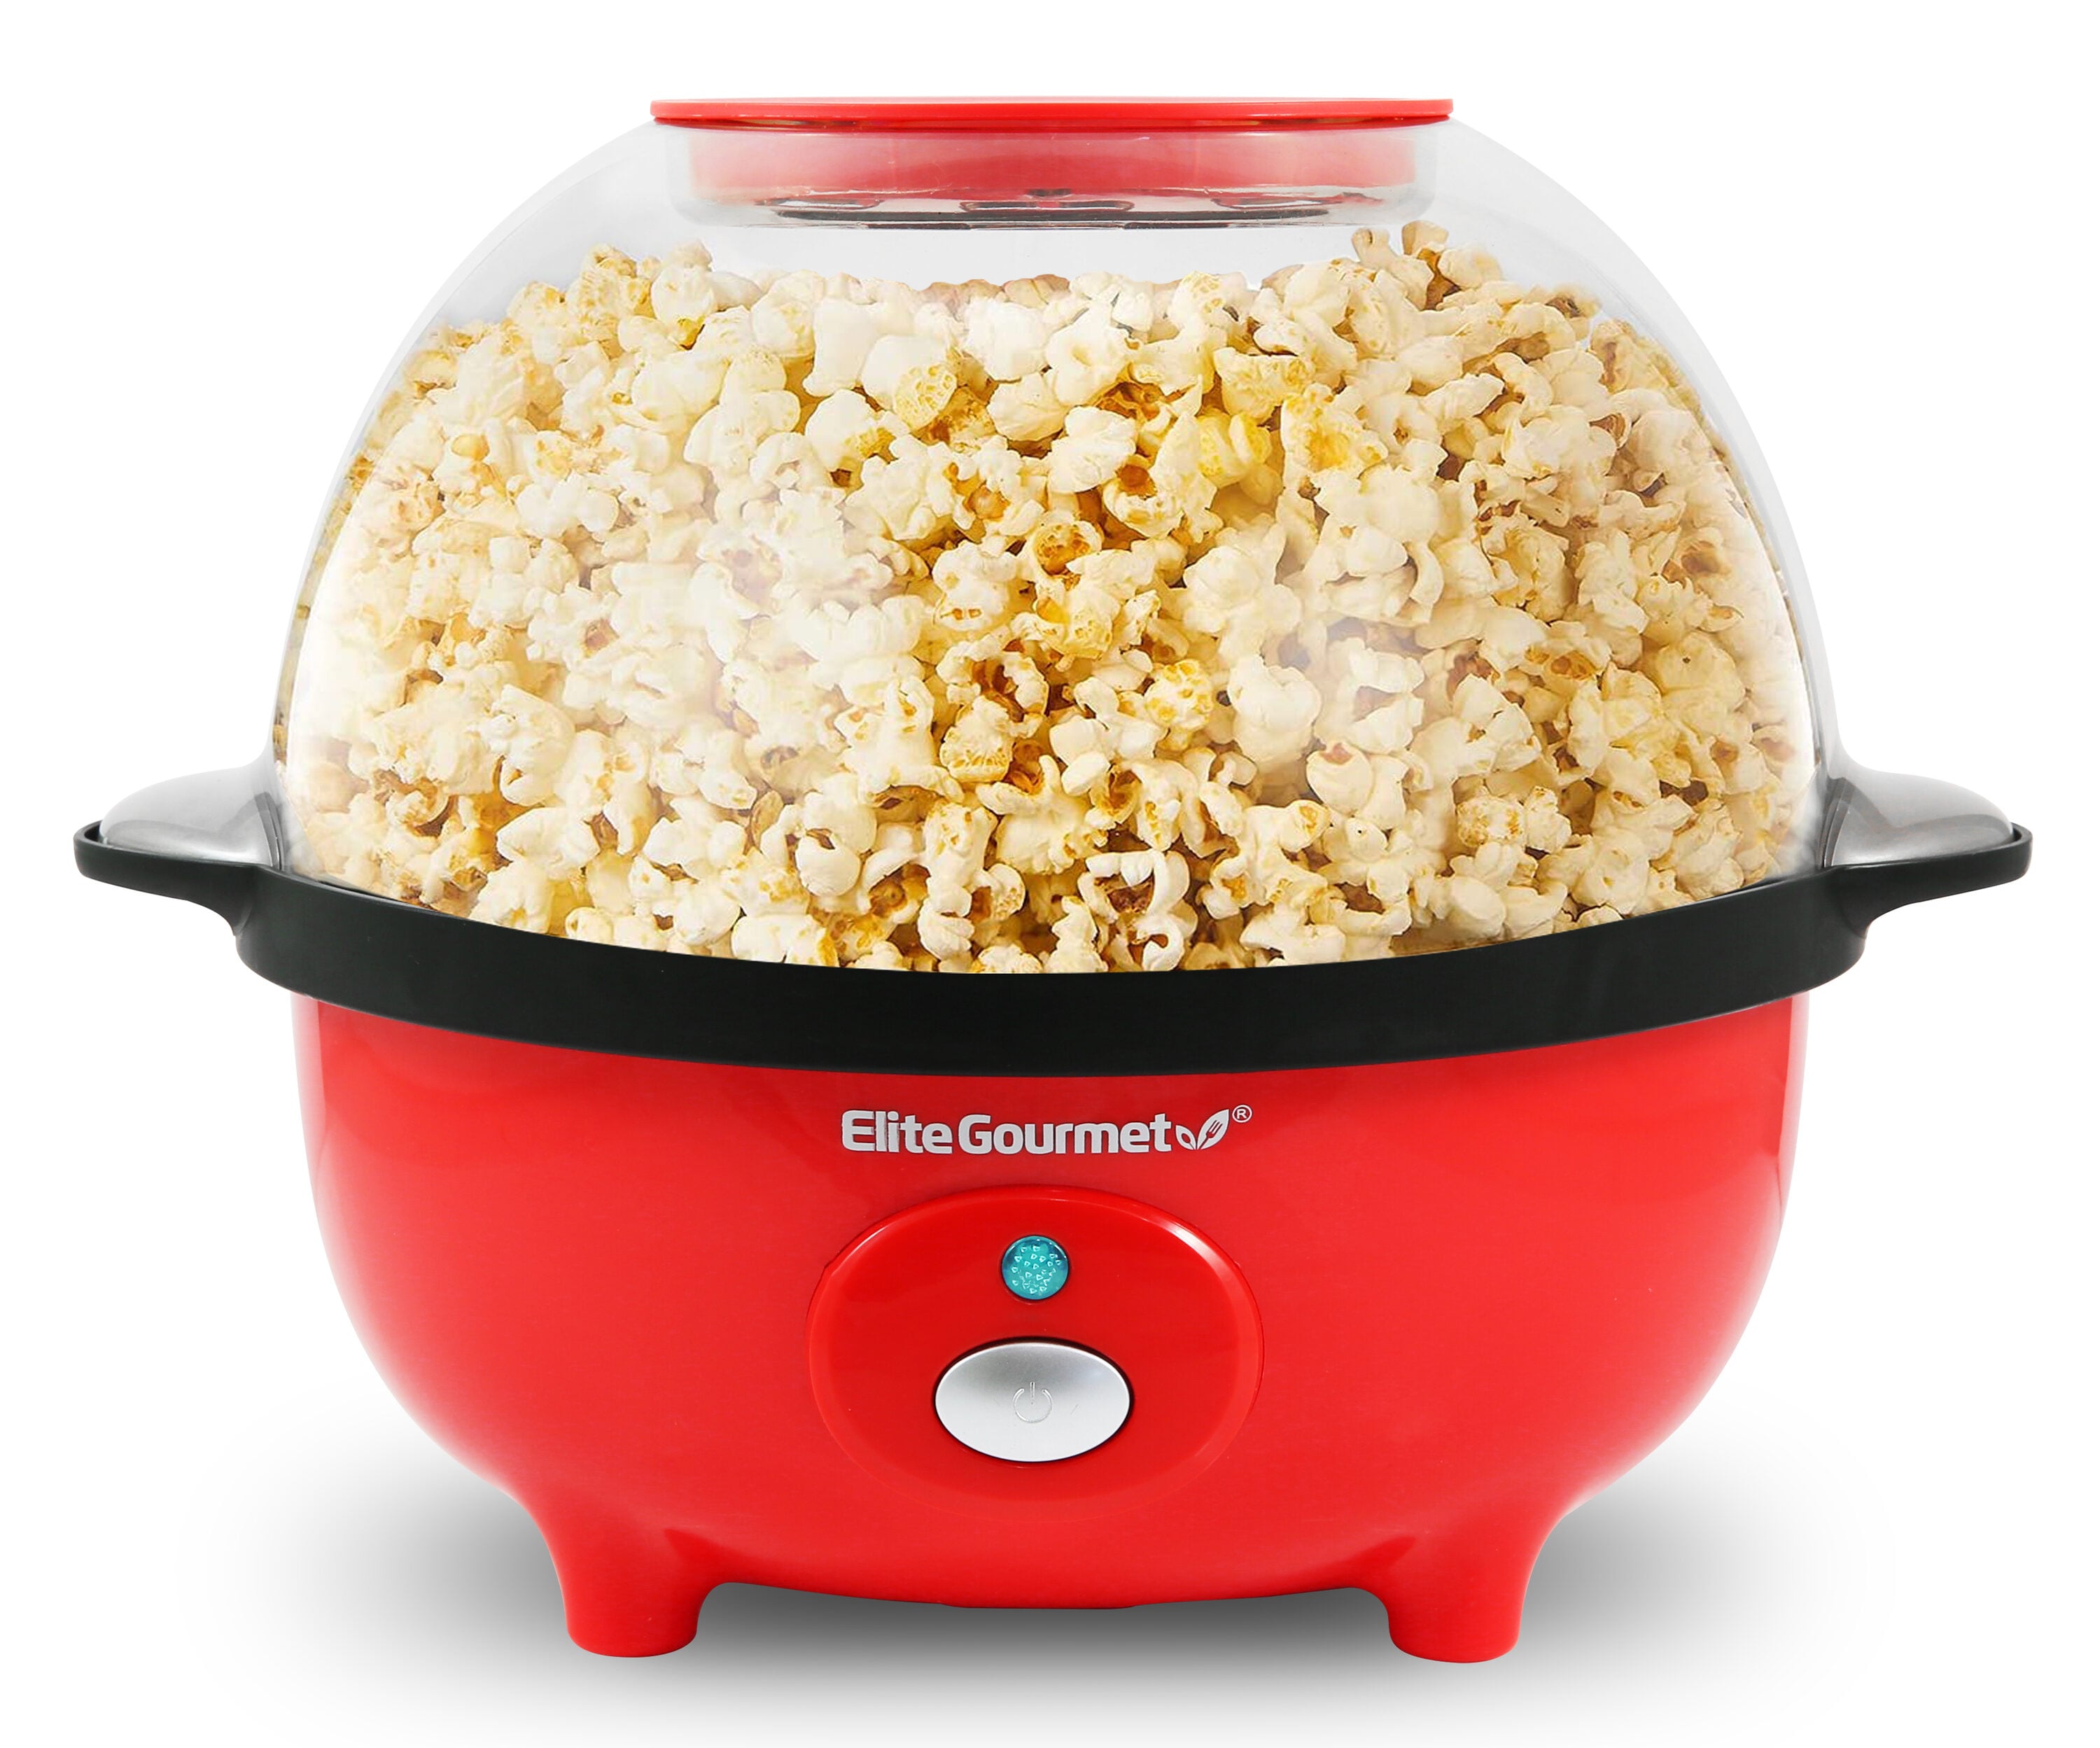 Hot Mini Air Popcorn Popper for Home 3 Minutes Fast Making Healthy Oil Free  Smart Popper Gift Set Maker Electric No Oil High Pop Rate Personal Small